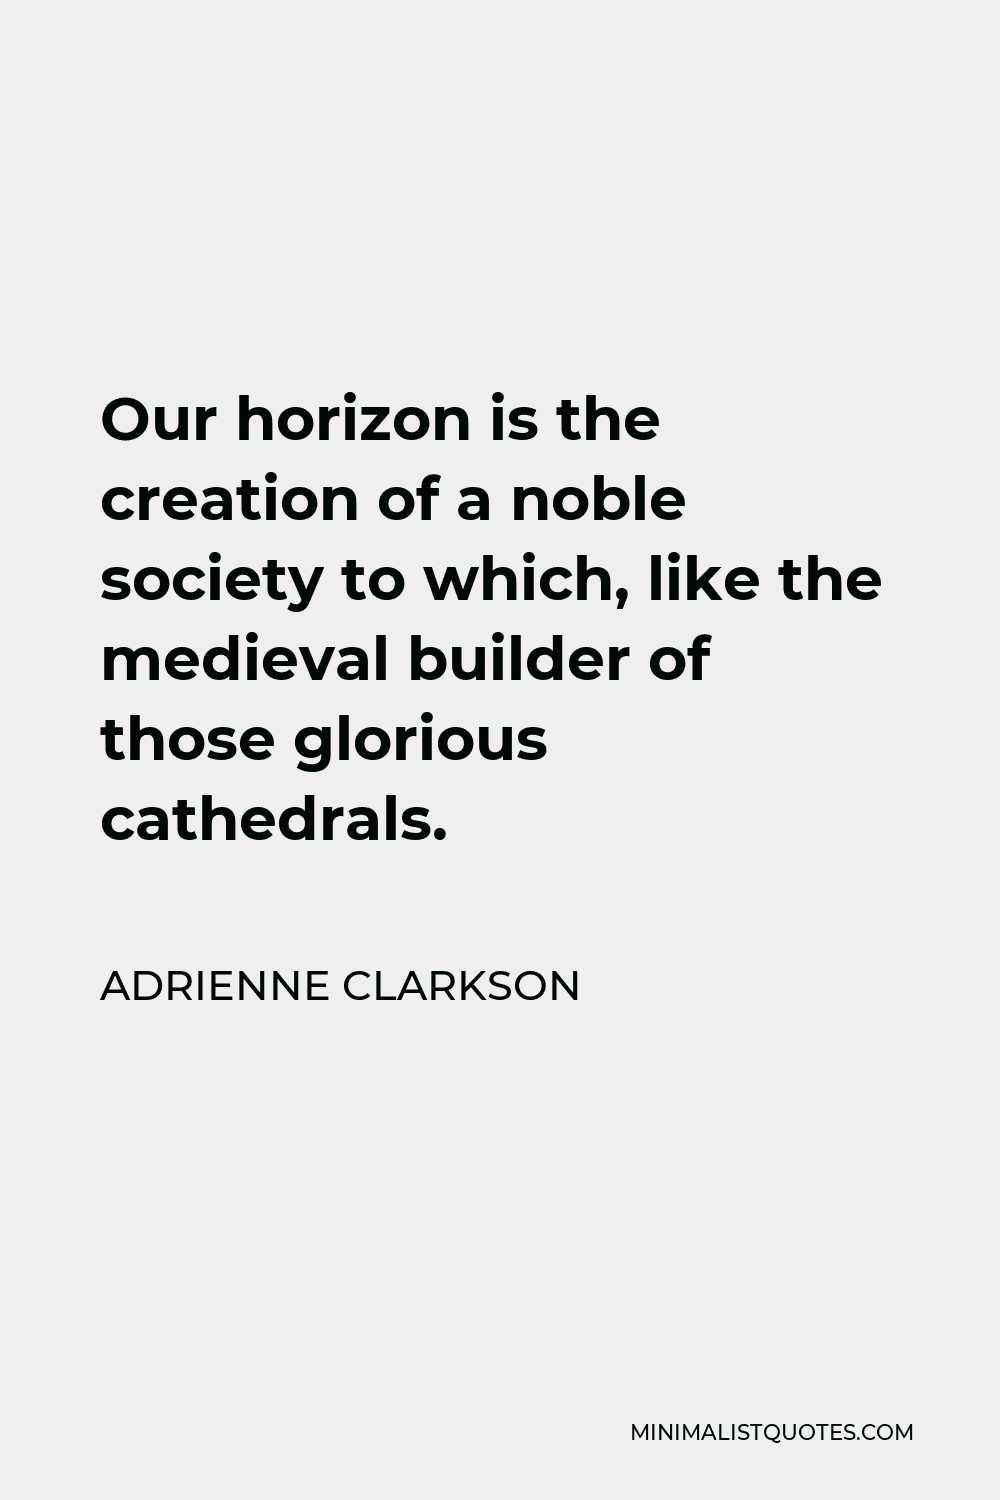 Adrienne Clarkson Quote - Our horizon is the creation of a noble society to which, like the medieval builder of those glorious cathedrals.